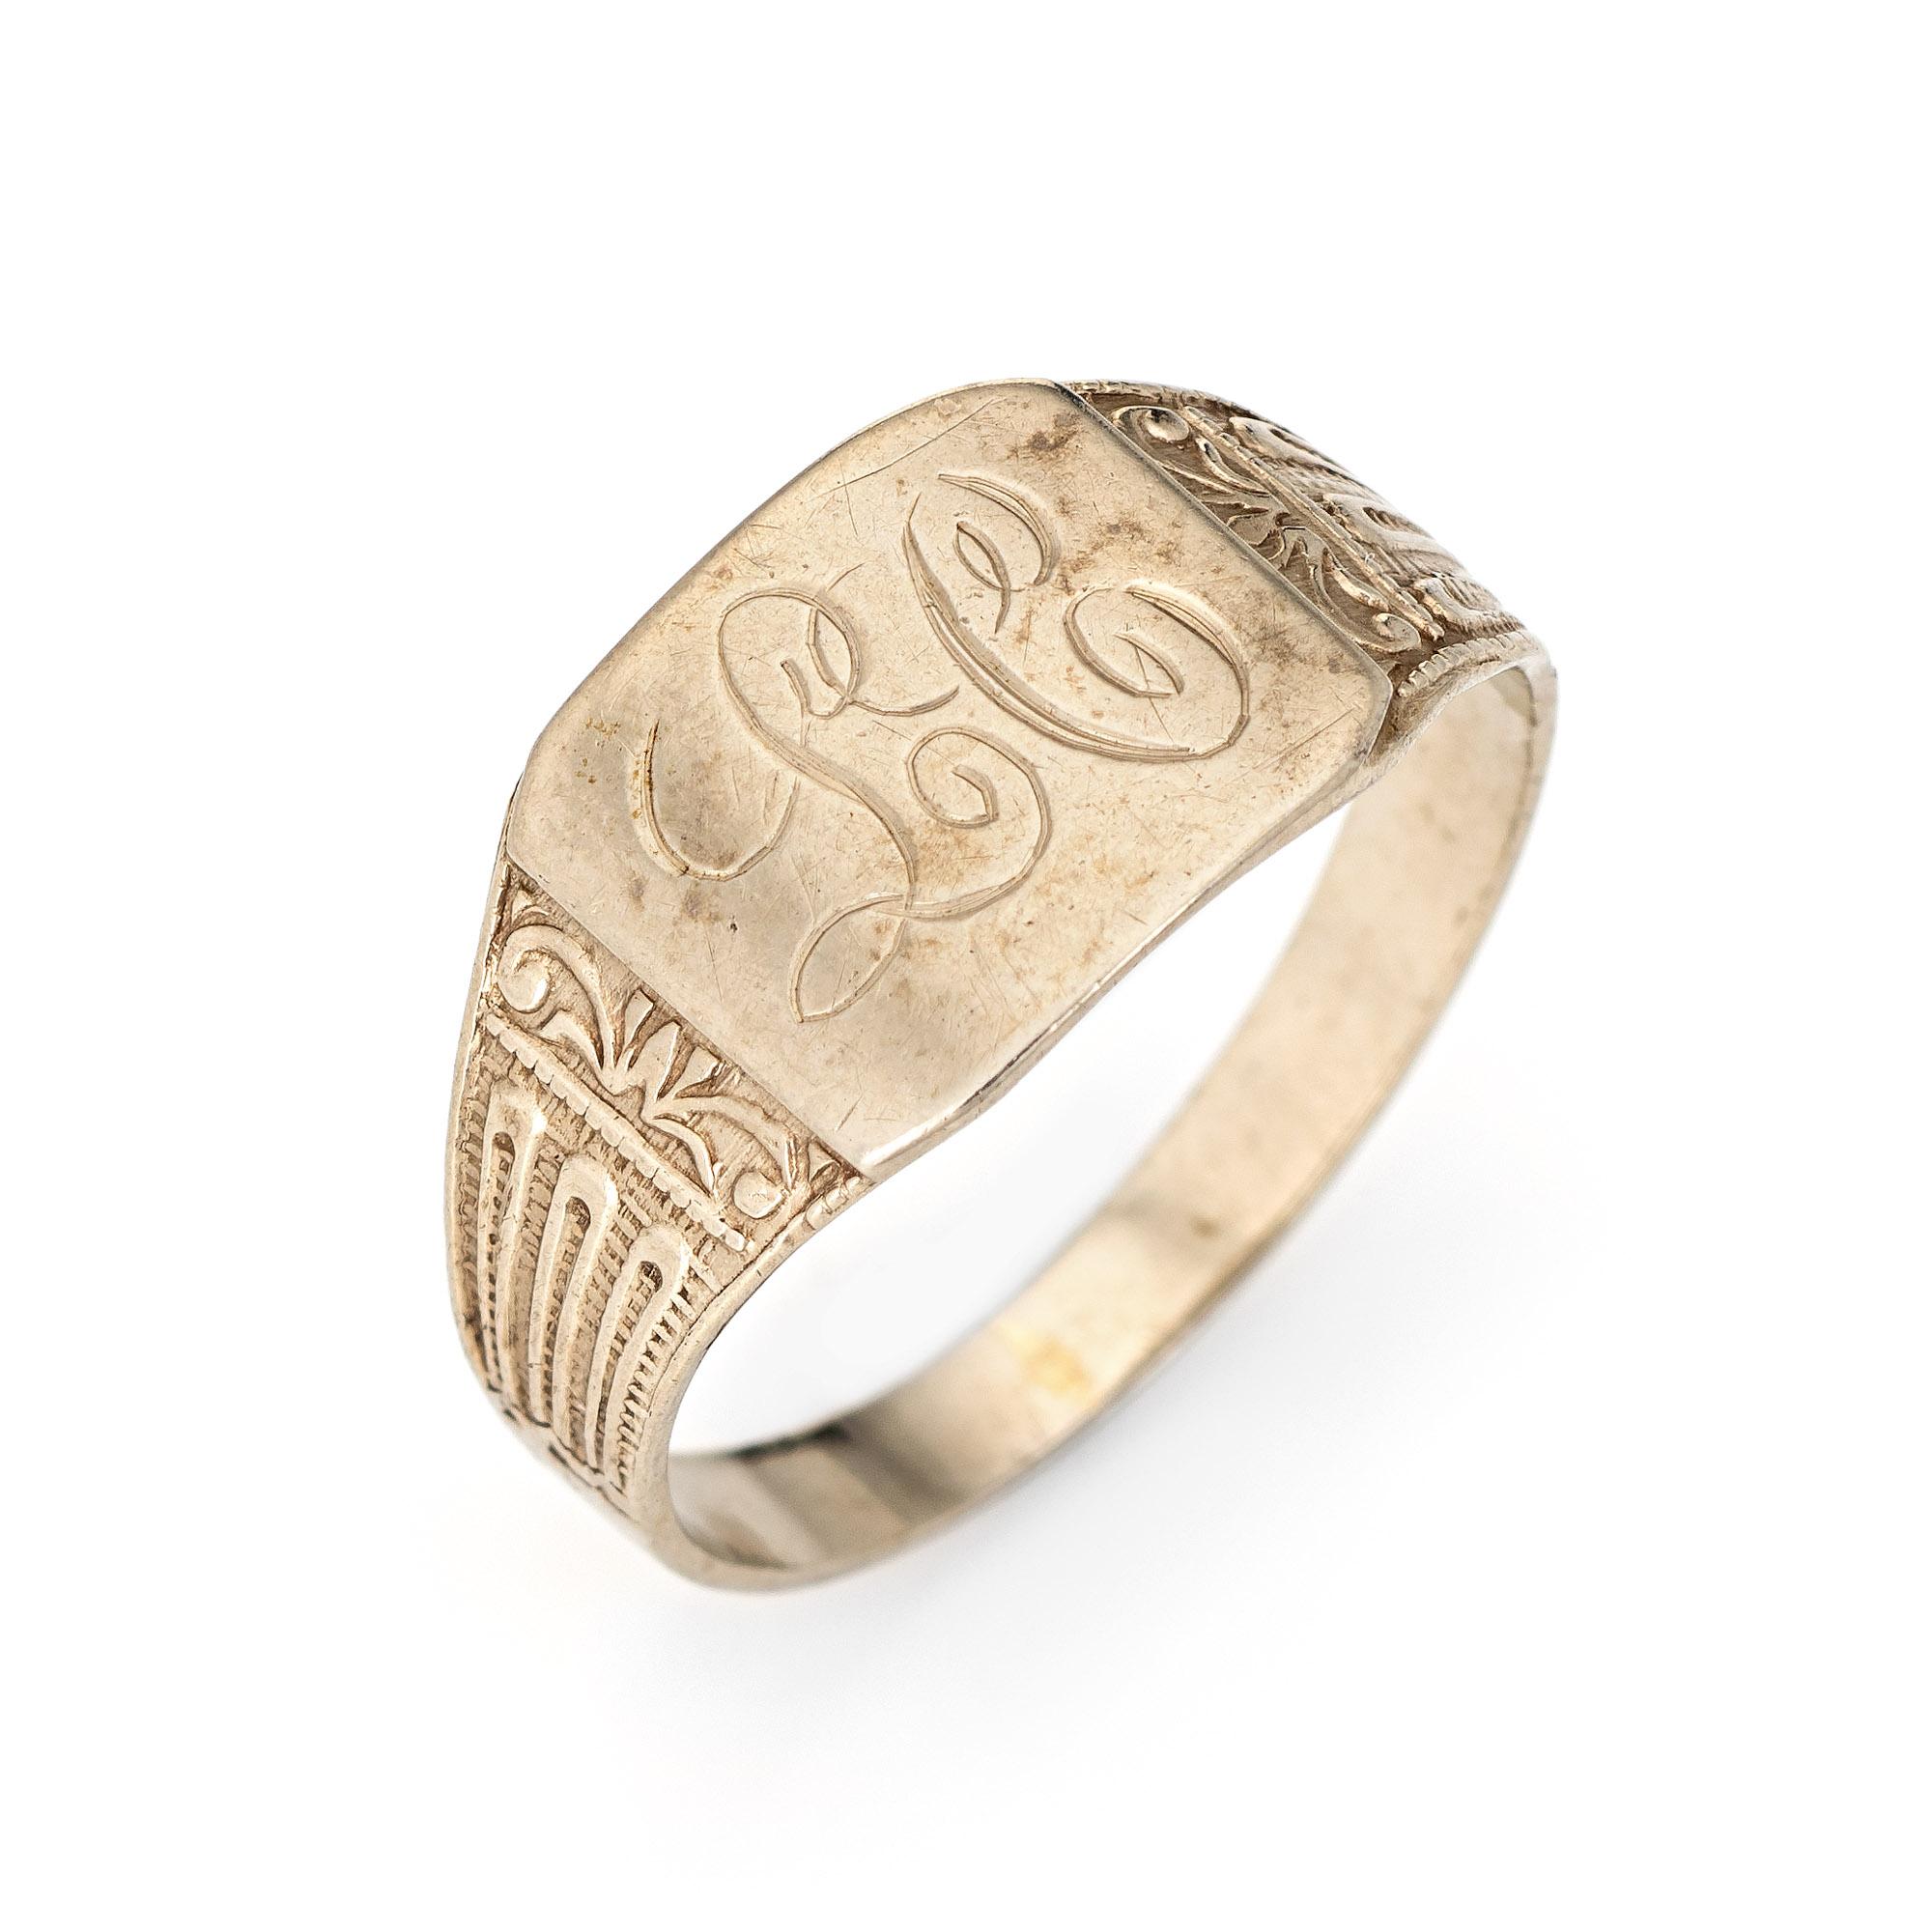 Finely detailed vintage Art Deco era signet ring (circa 1920s to 1930s) crafted in 14 karat white gold. 

The signet ring features a square mount with the engraved initials 